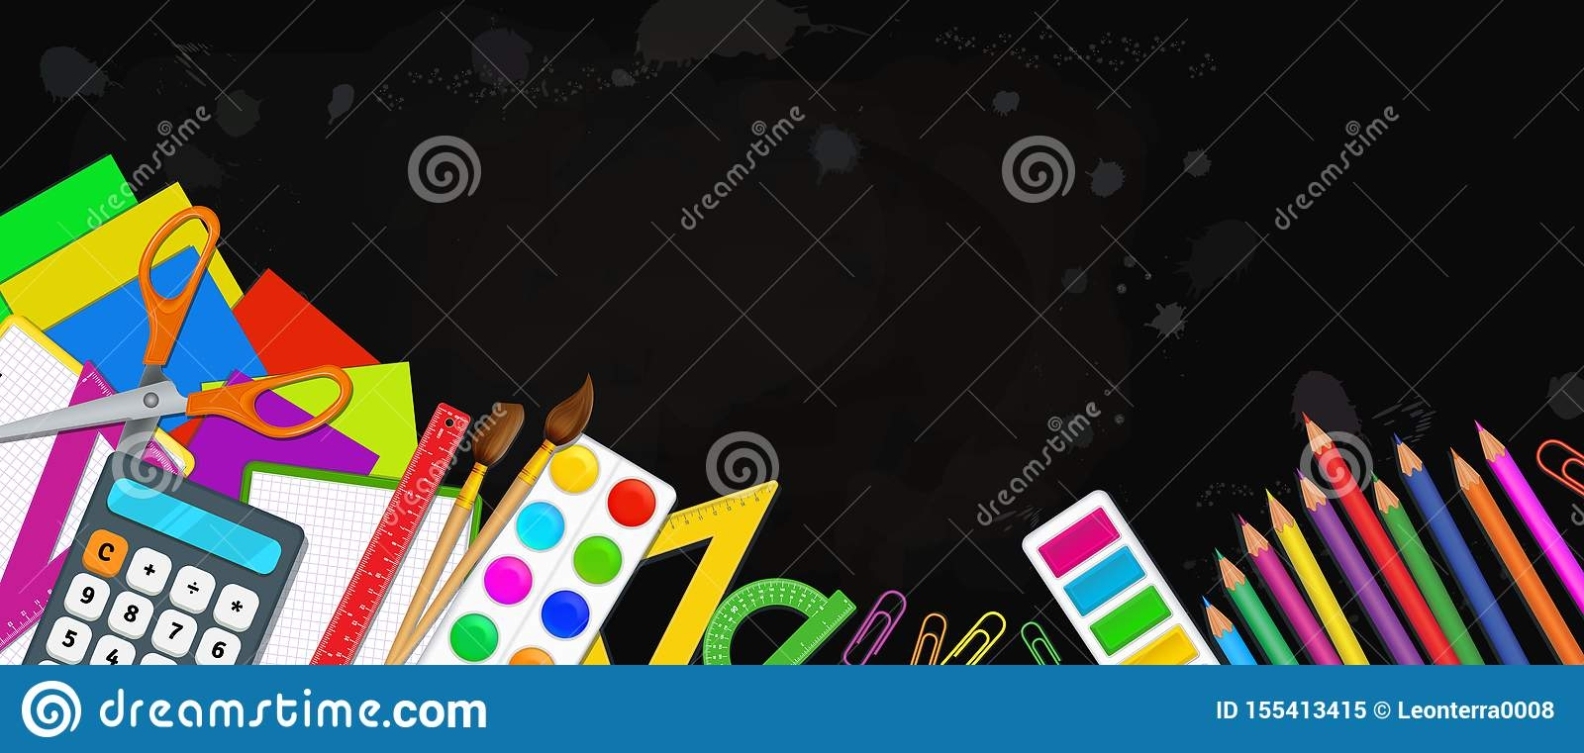 Back To School Education Banner Template With Colorful School Supplies Like Pencils, Paint intended for Classroom Banner Template